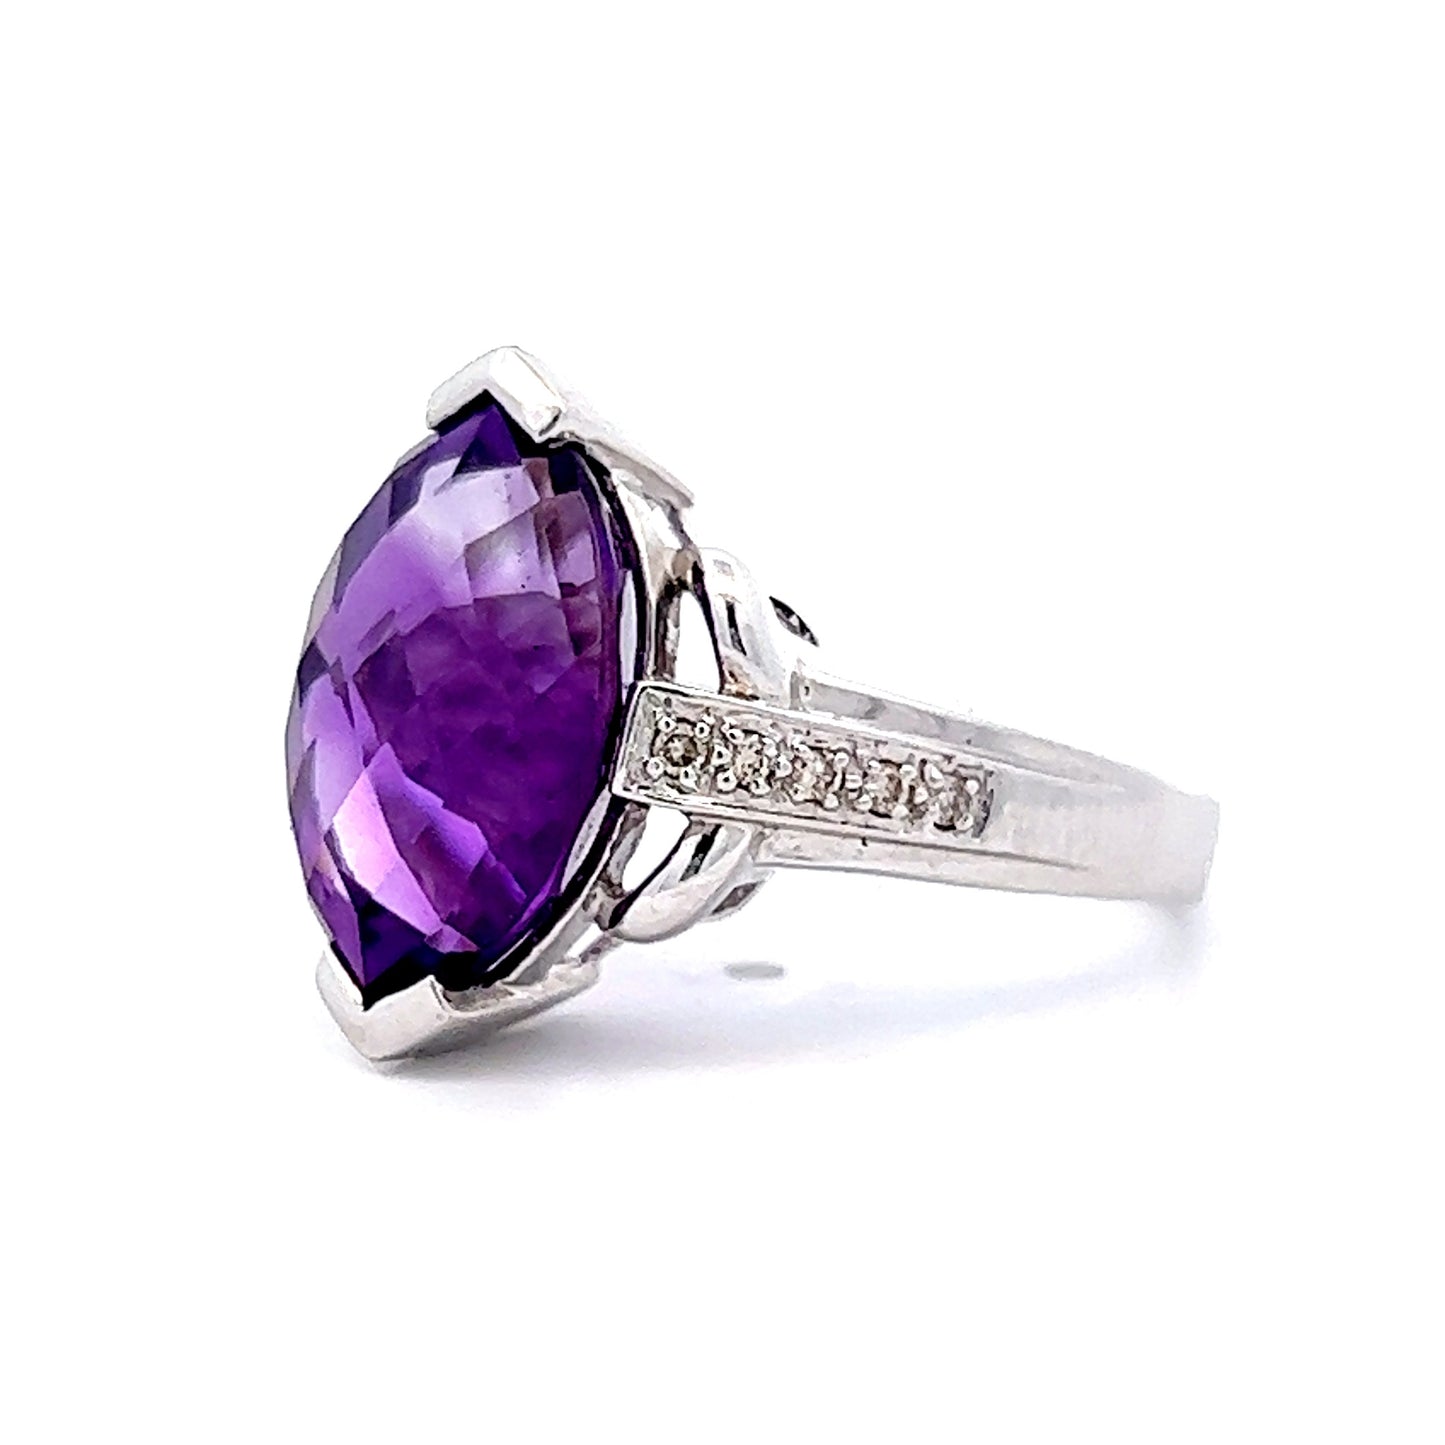 5.09 Marquise Cut Amethyst Cocktail Ring in 14k White Gold